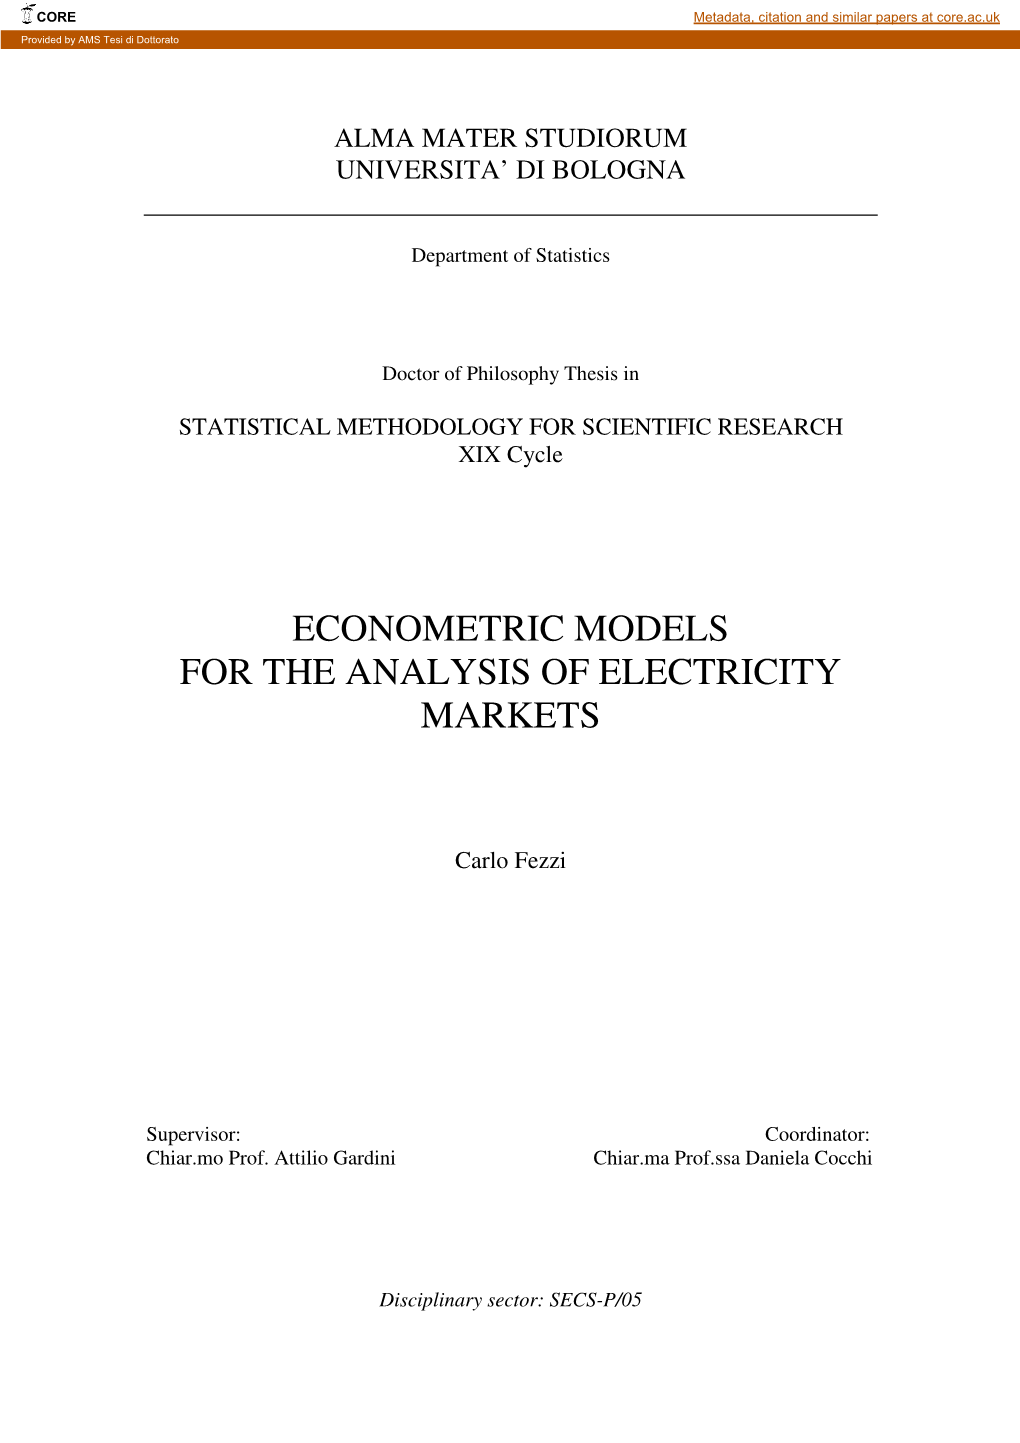 Econometric Models for the Analysis of Electricity Markets